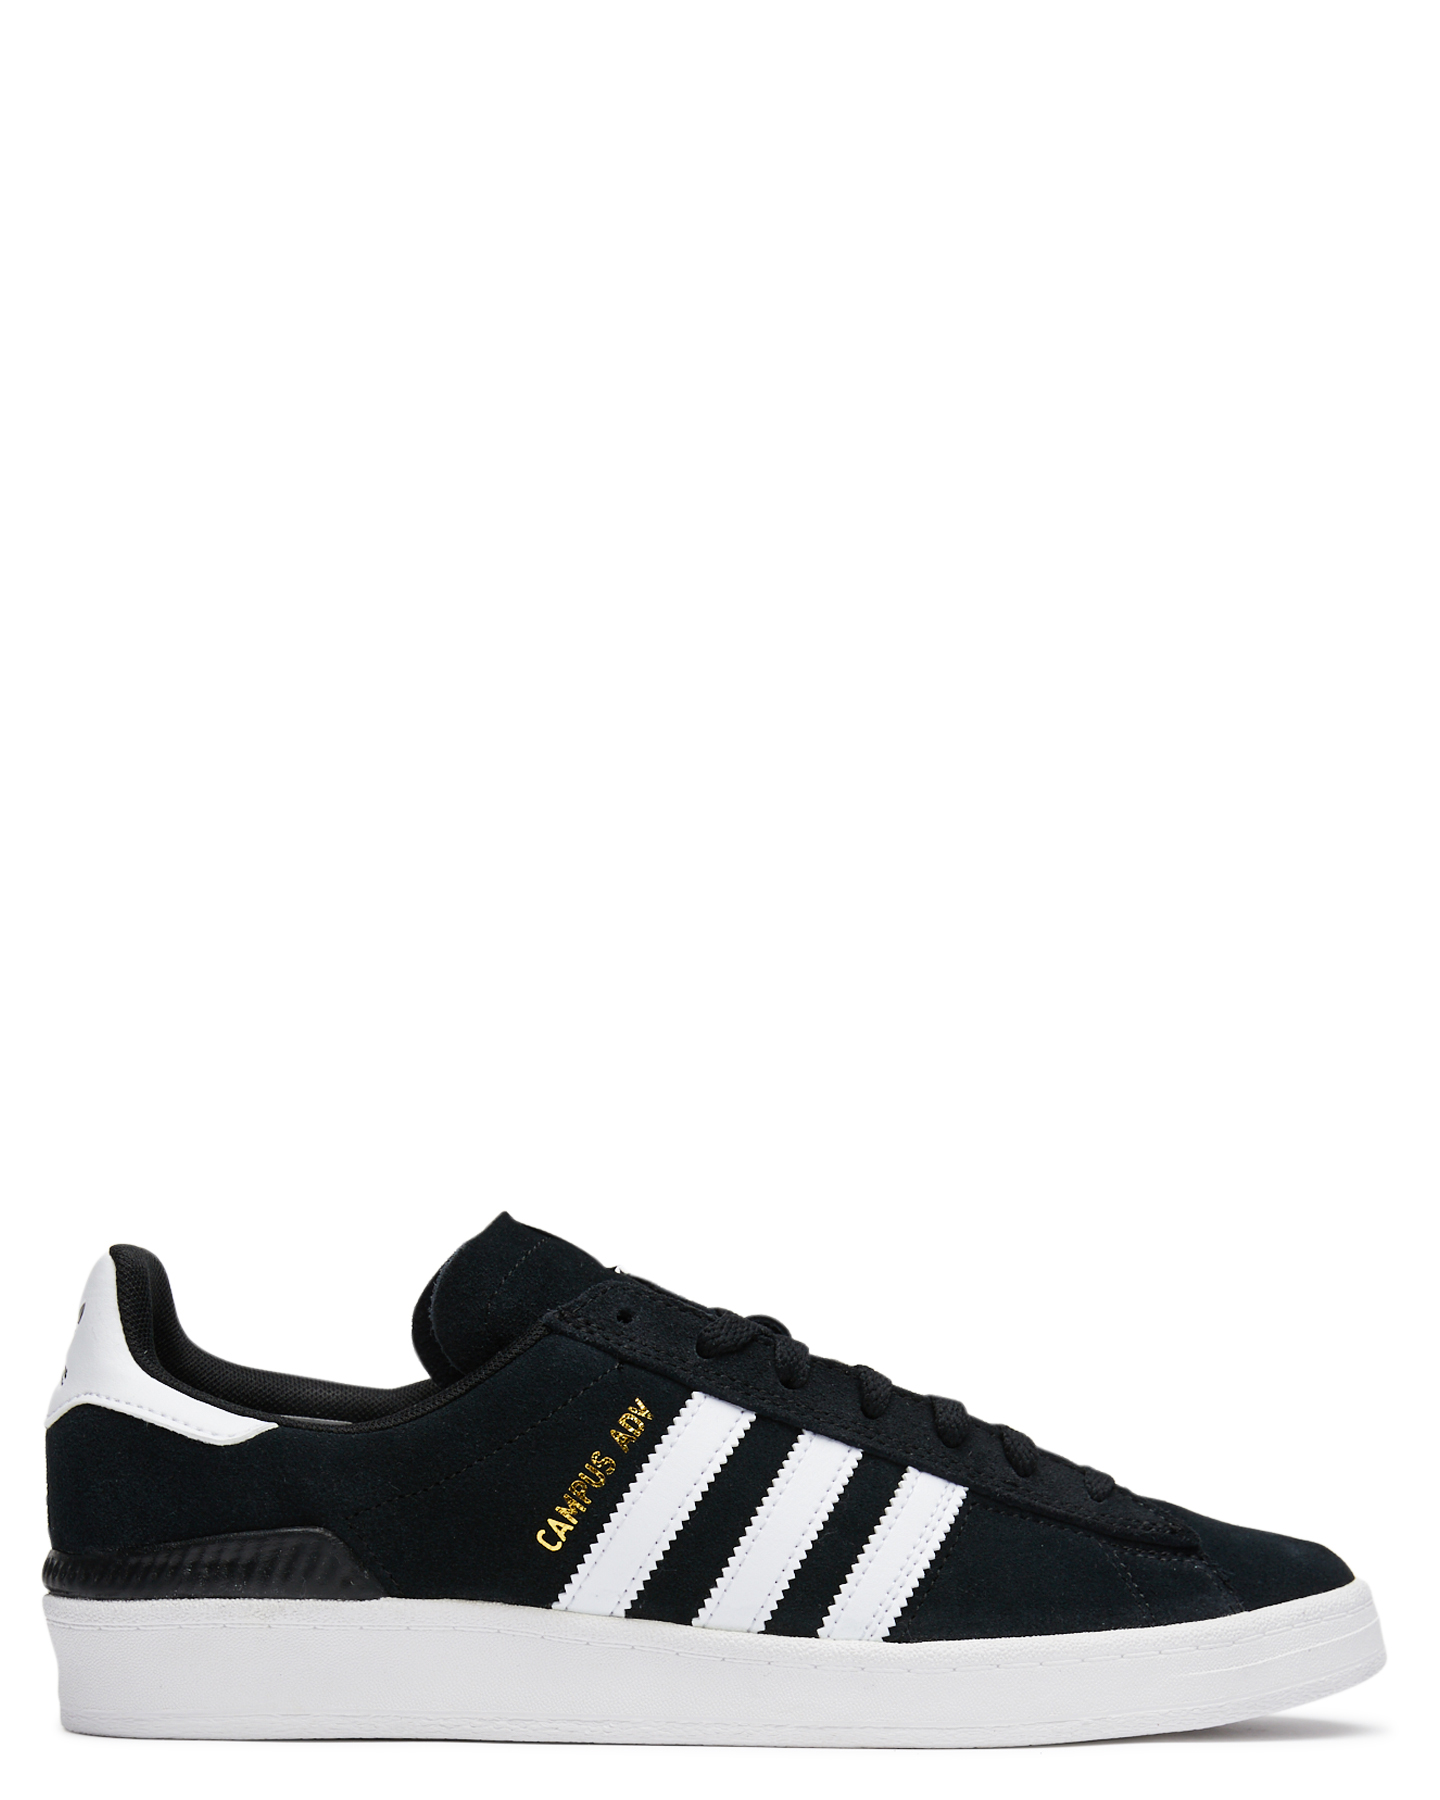 adidas sneakers womens black and white